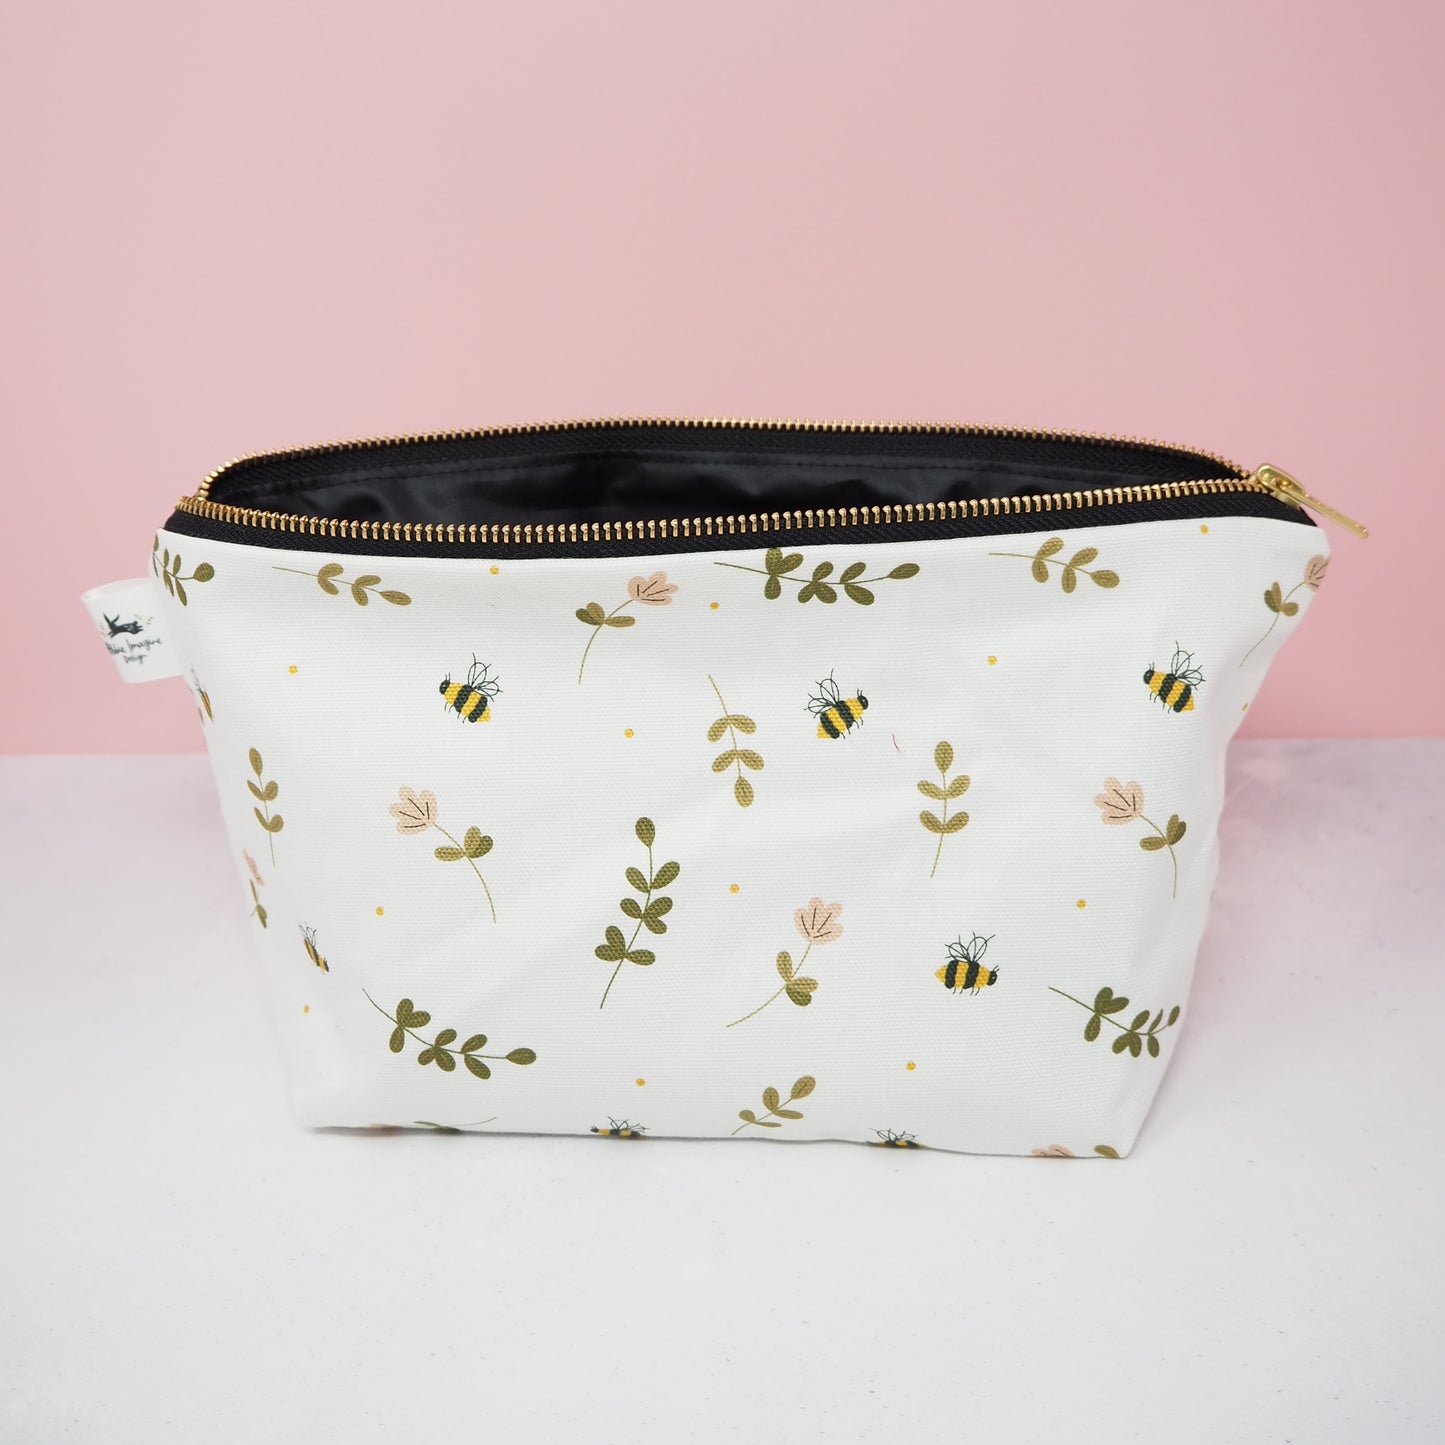 Open Bees and Flowers cosmetic bag by Abbie Imagine